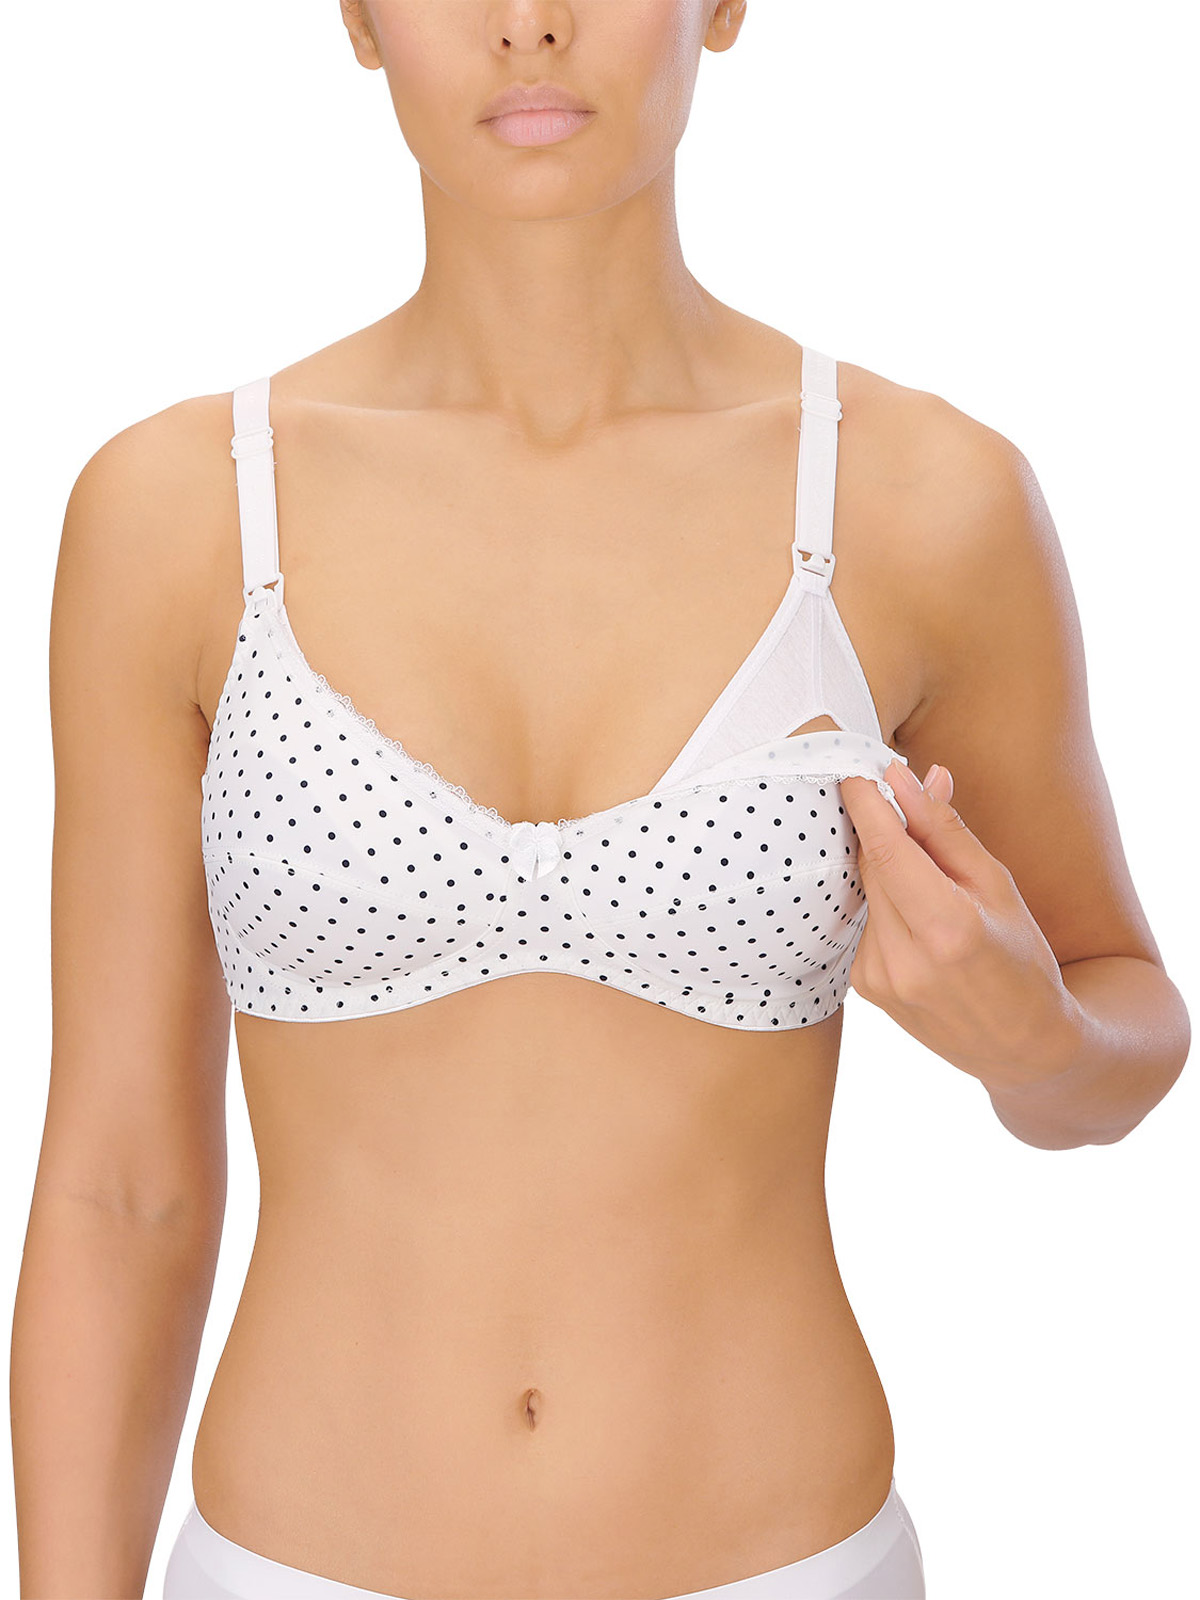 Naturana - - Naturana ASSORTED Soft Cup Non-Wired Bras - Size 34